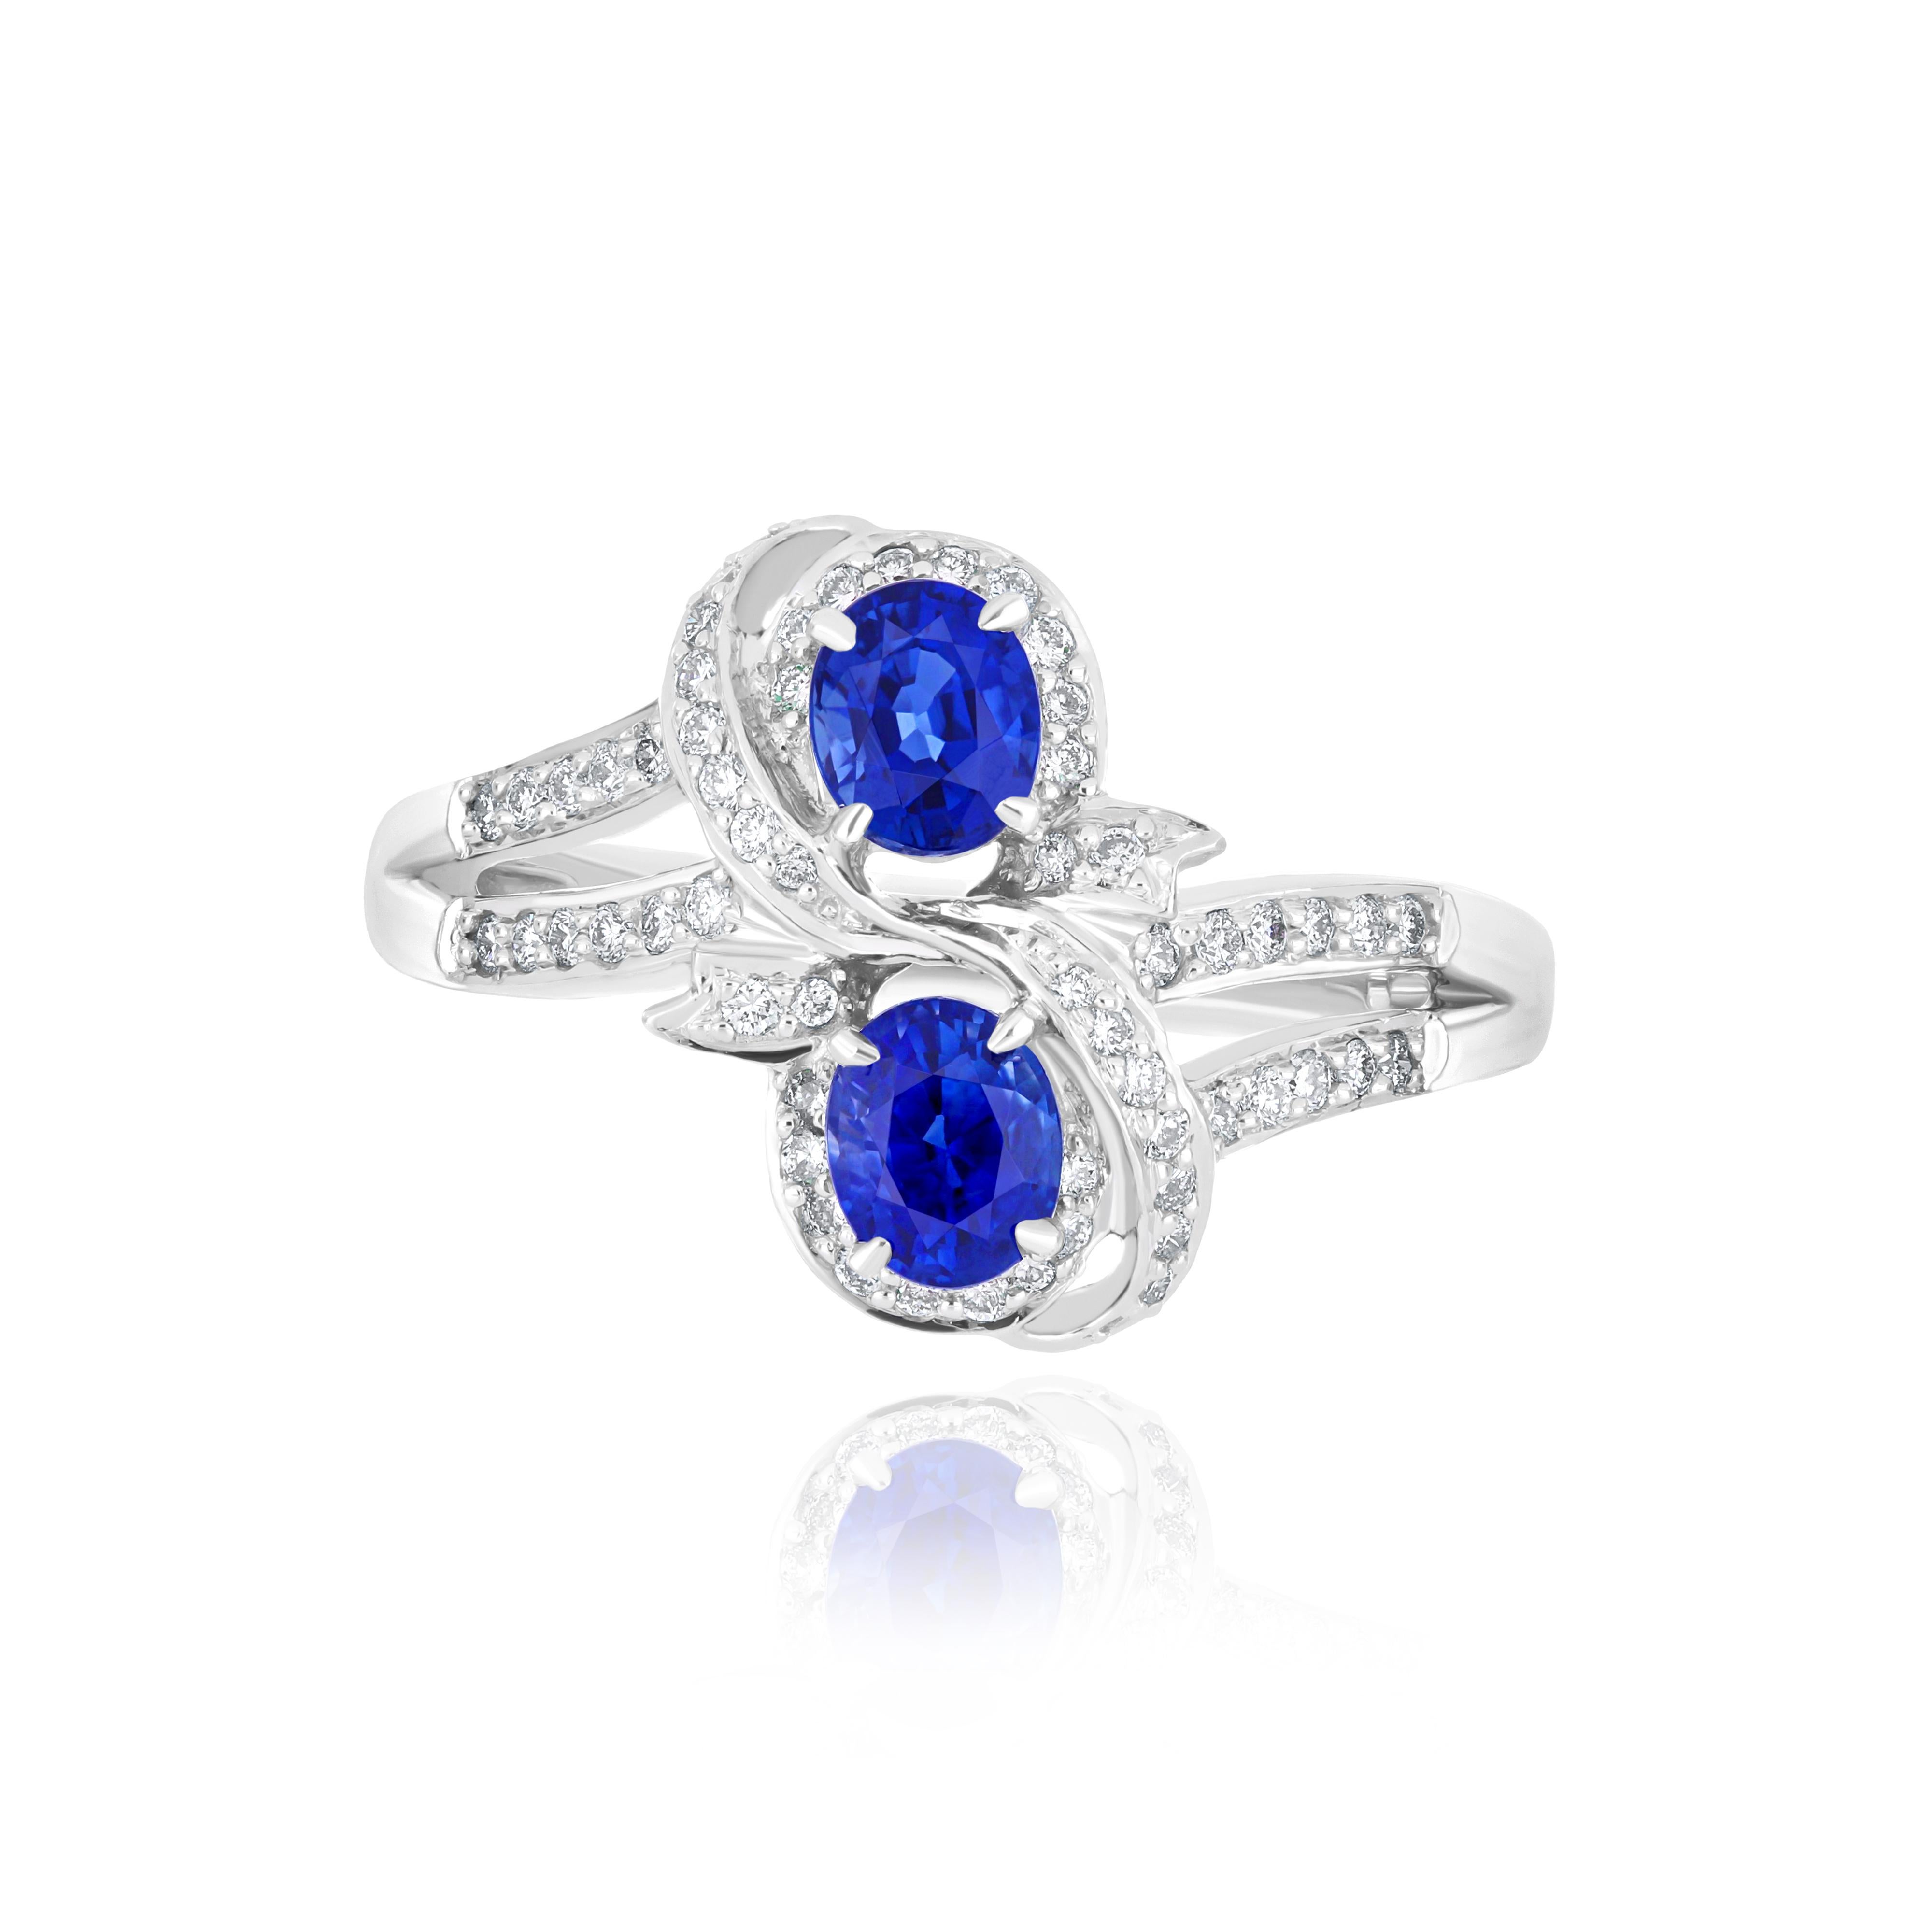 Elegant and exquisitely detailed 18 Karat White Gold Ring, center set with 1.14Cts .Oval Shape Blue Sapphire and micro pave set Diamonds, weighing approx. 0.27Cts Beautifully Hand crafted in 18 Karat White Gold.

Stone Detail:
Blue Sapphire: